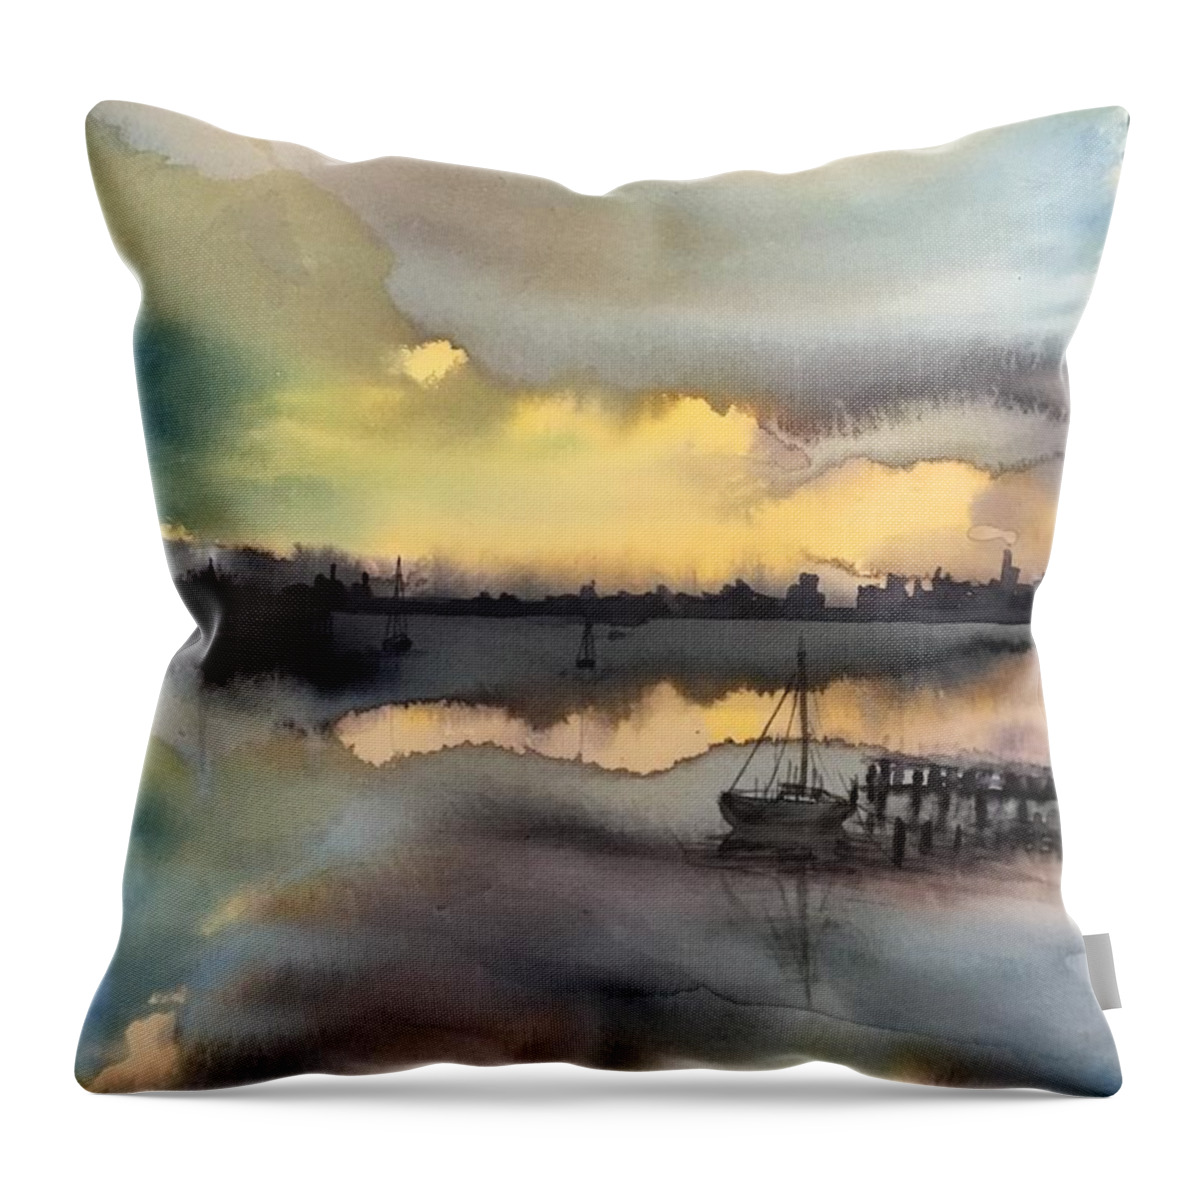 The Sunset Throw Pillow featuring the painting The sunset by Han in Huang wong